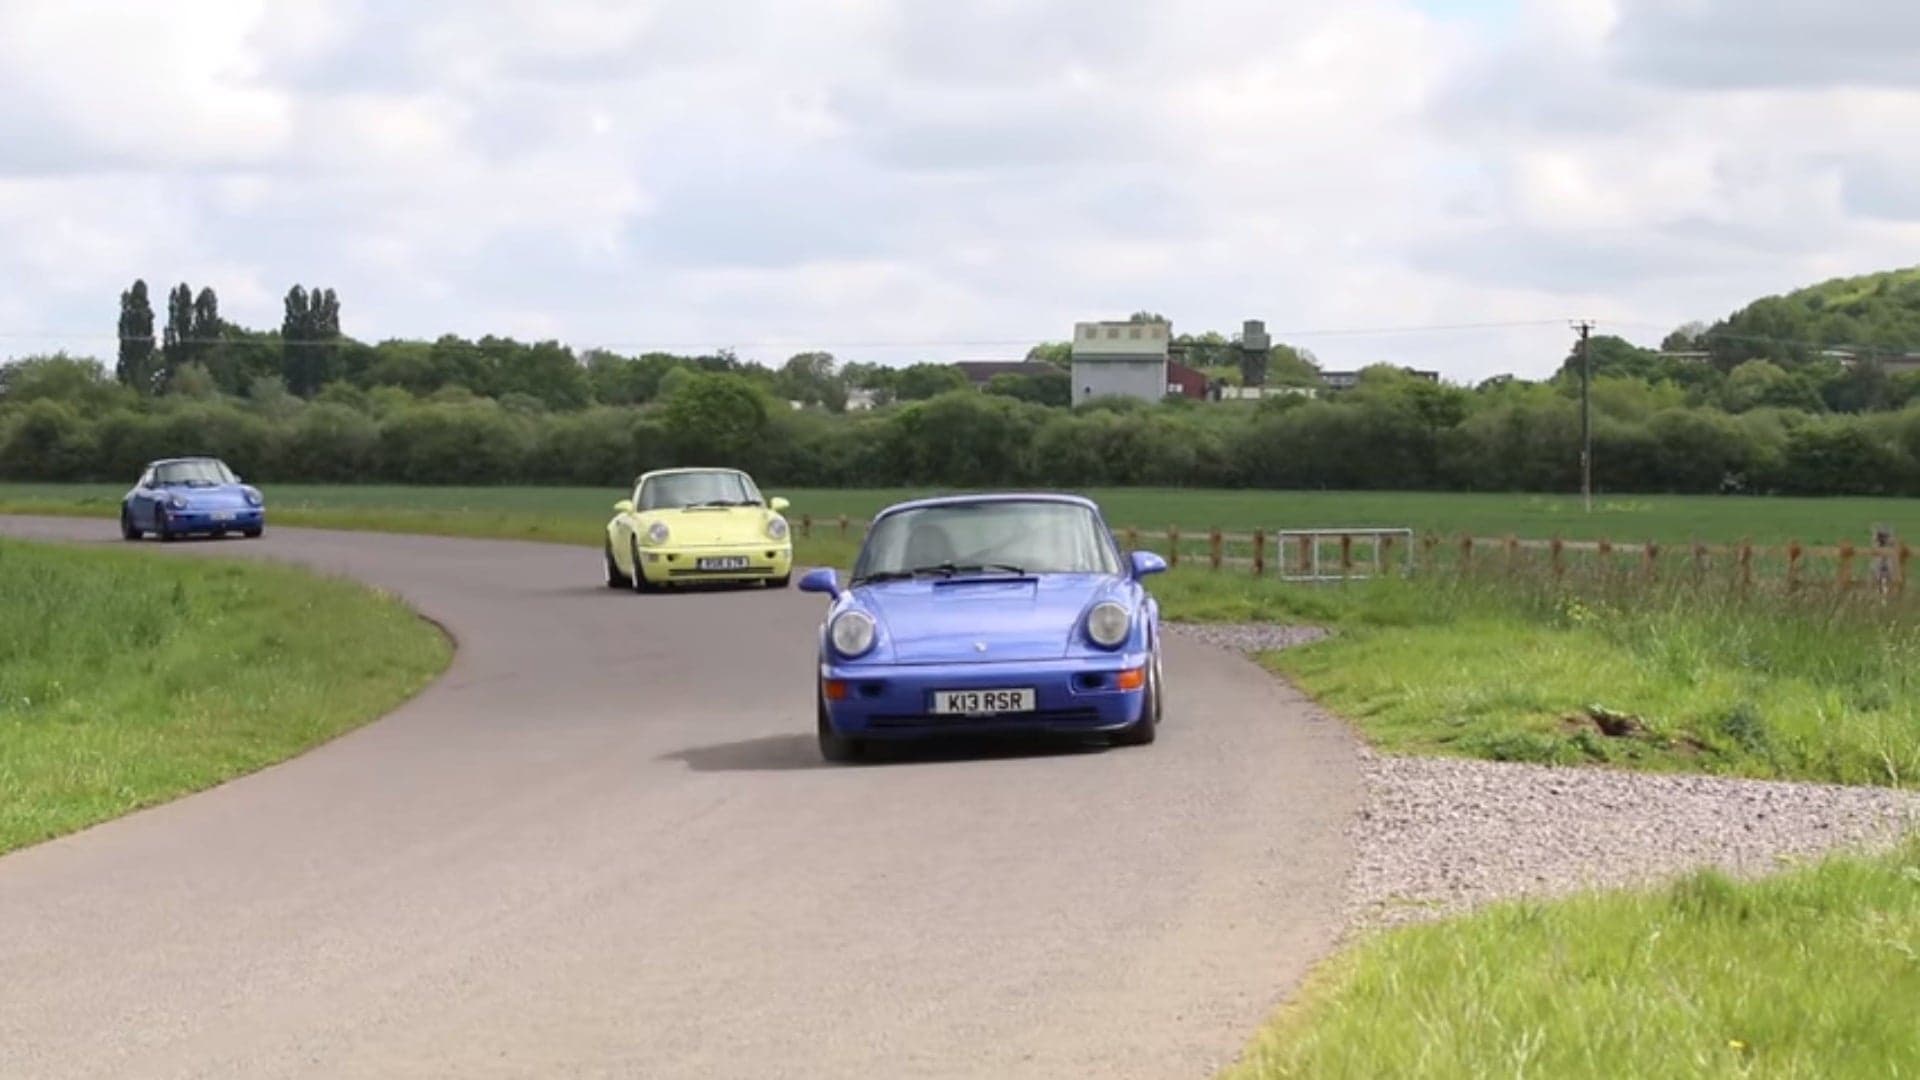 Can A Modified Porsche 964 Compete With A Real Carrera RS?